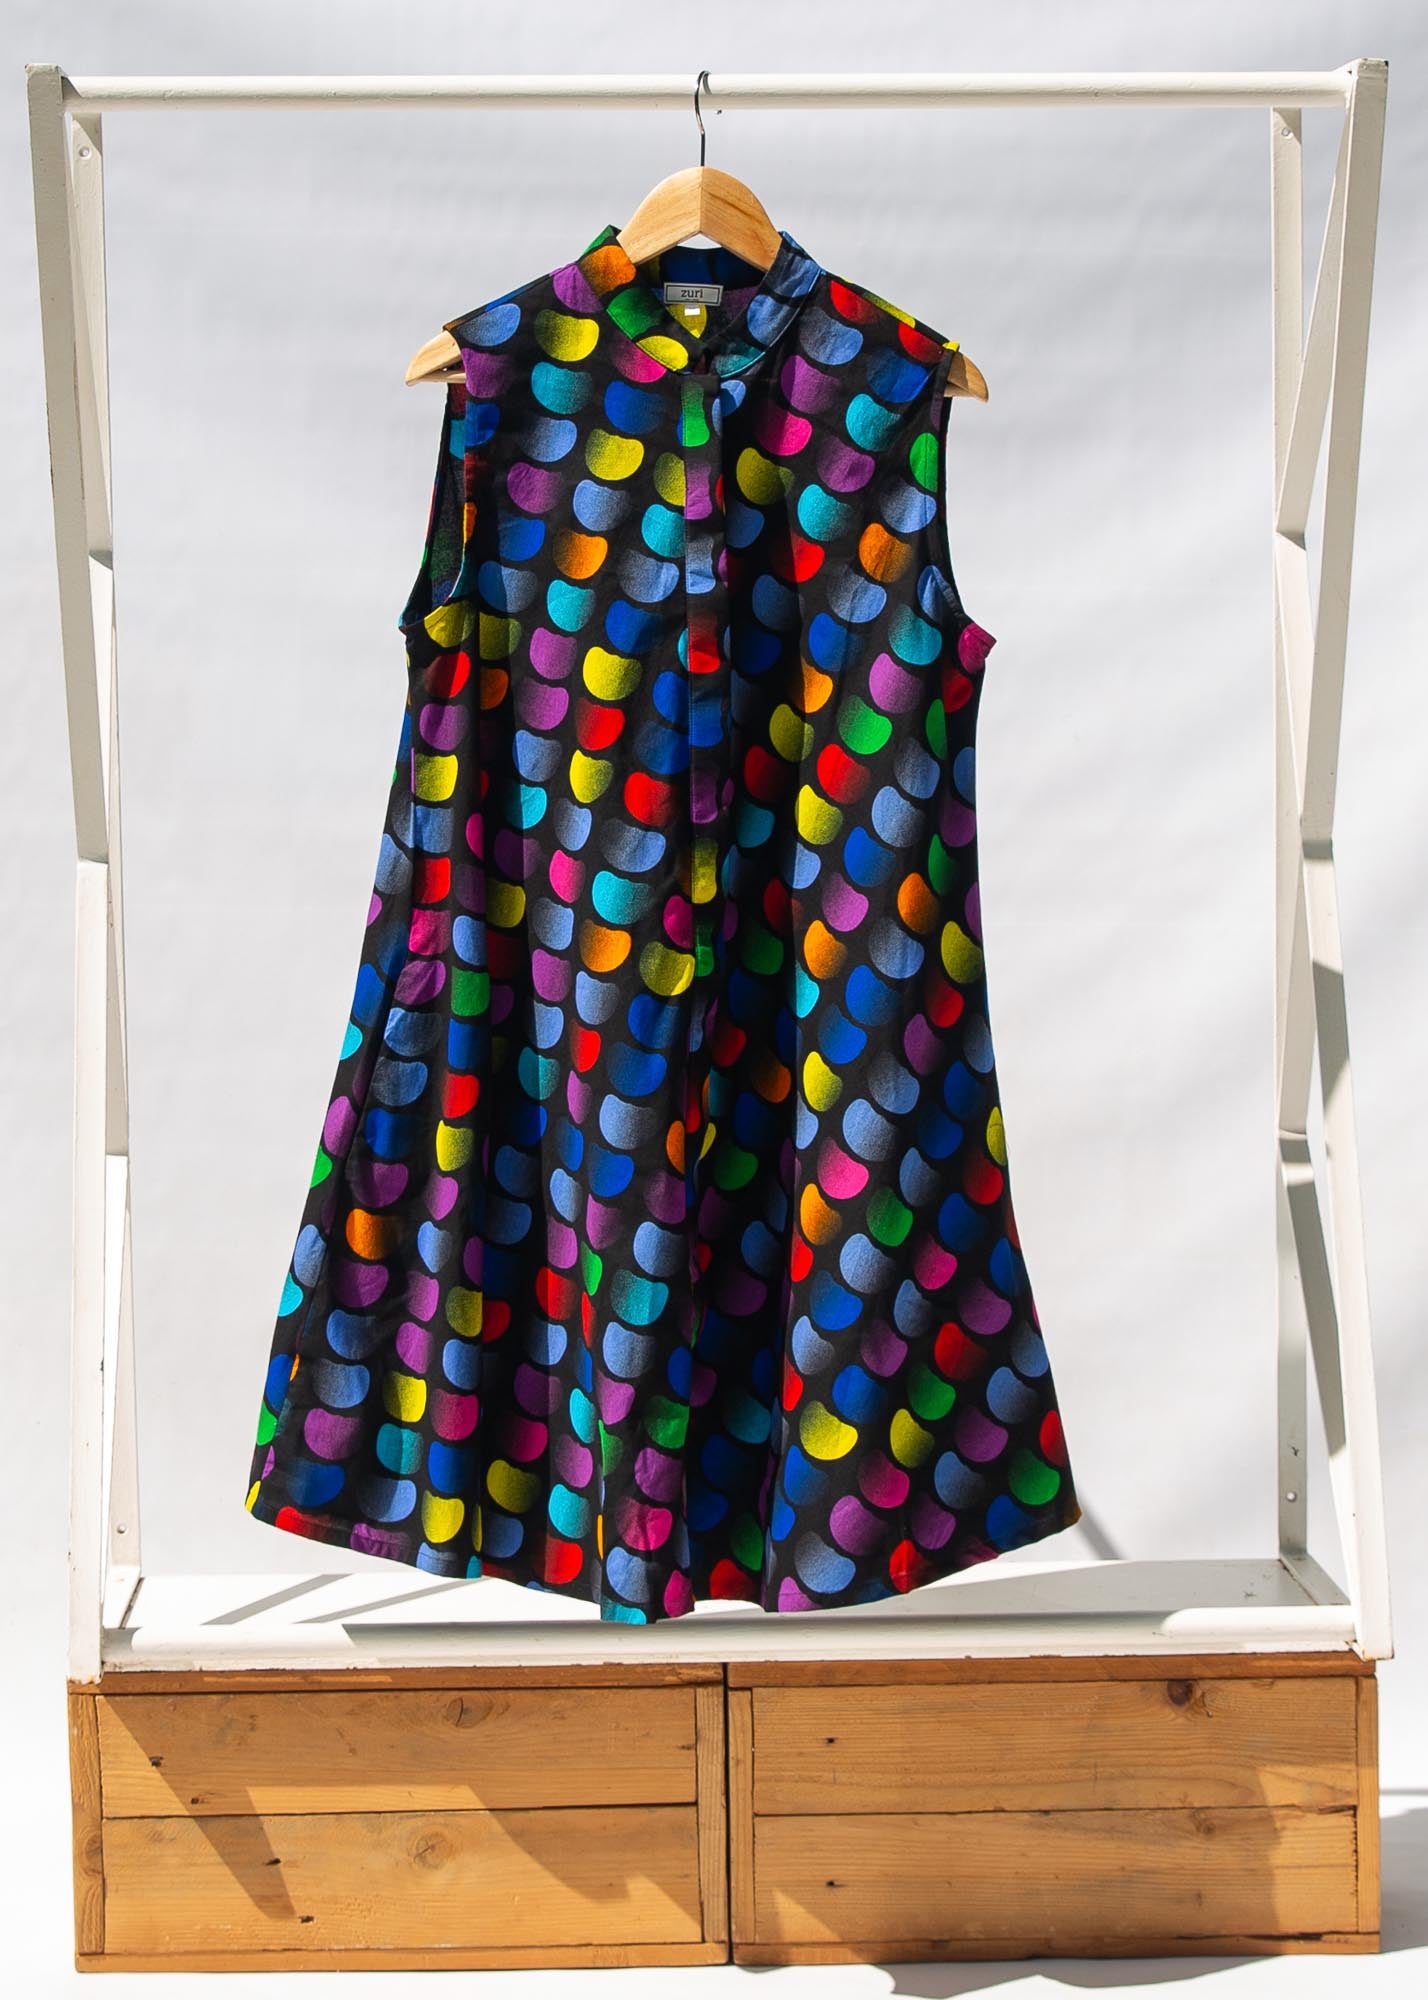 Display of black dress with colorful panel